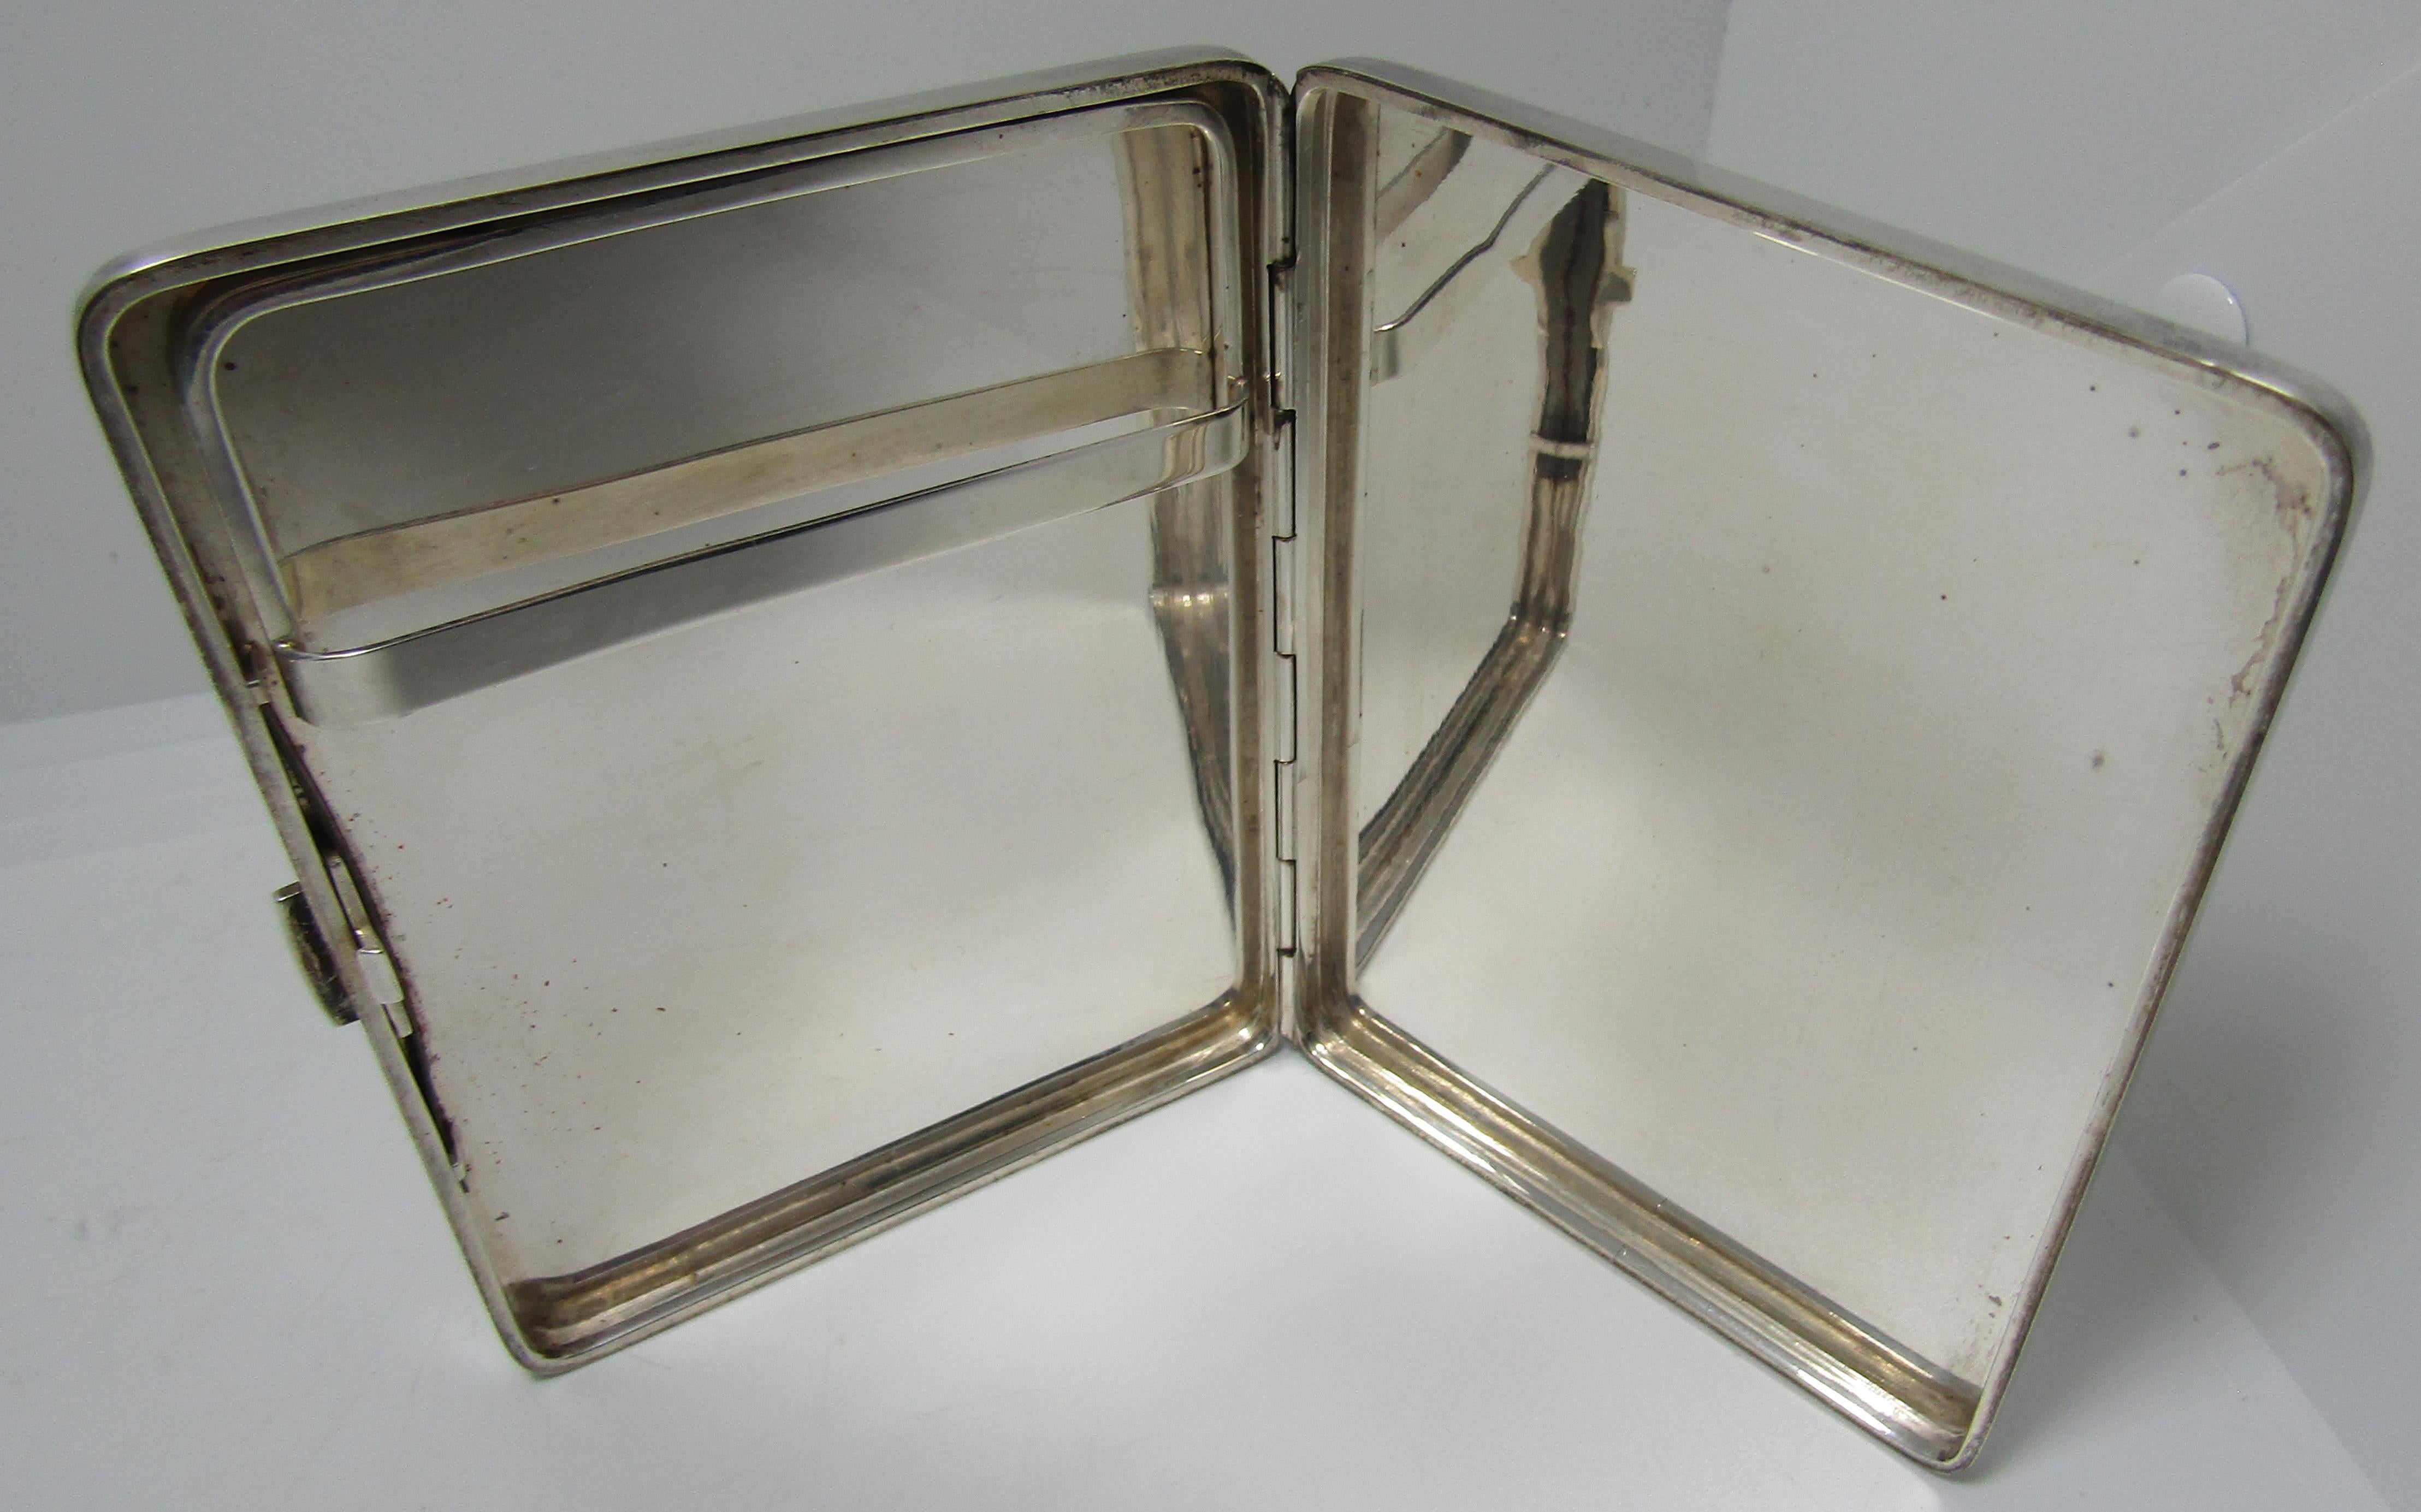 This Vintage Art Deco Tiffany & Co Solid Sterling Silver Cigarette Case From Italy was made circa 1925 and is in excellent, used condition. It is signed Tiffany & Co, 925, made in Italy. It measures 4.5